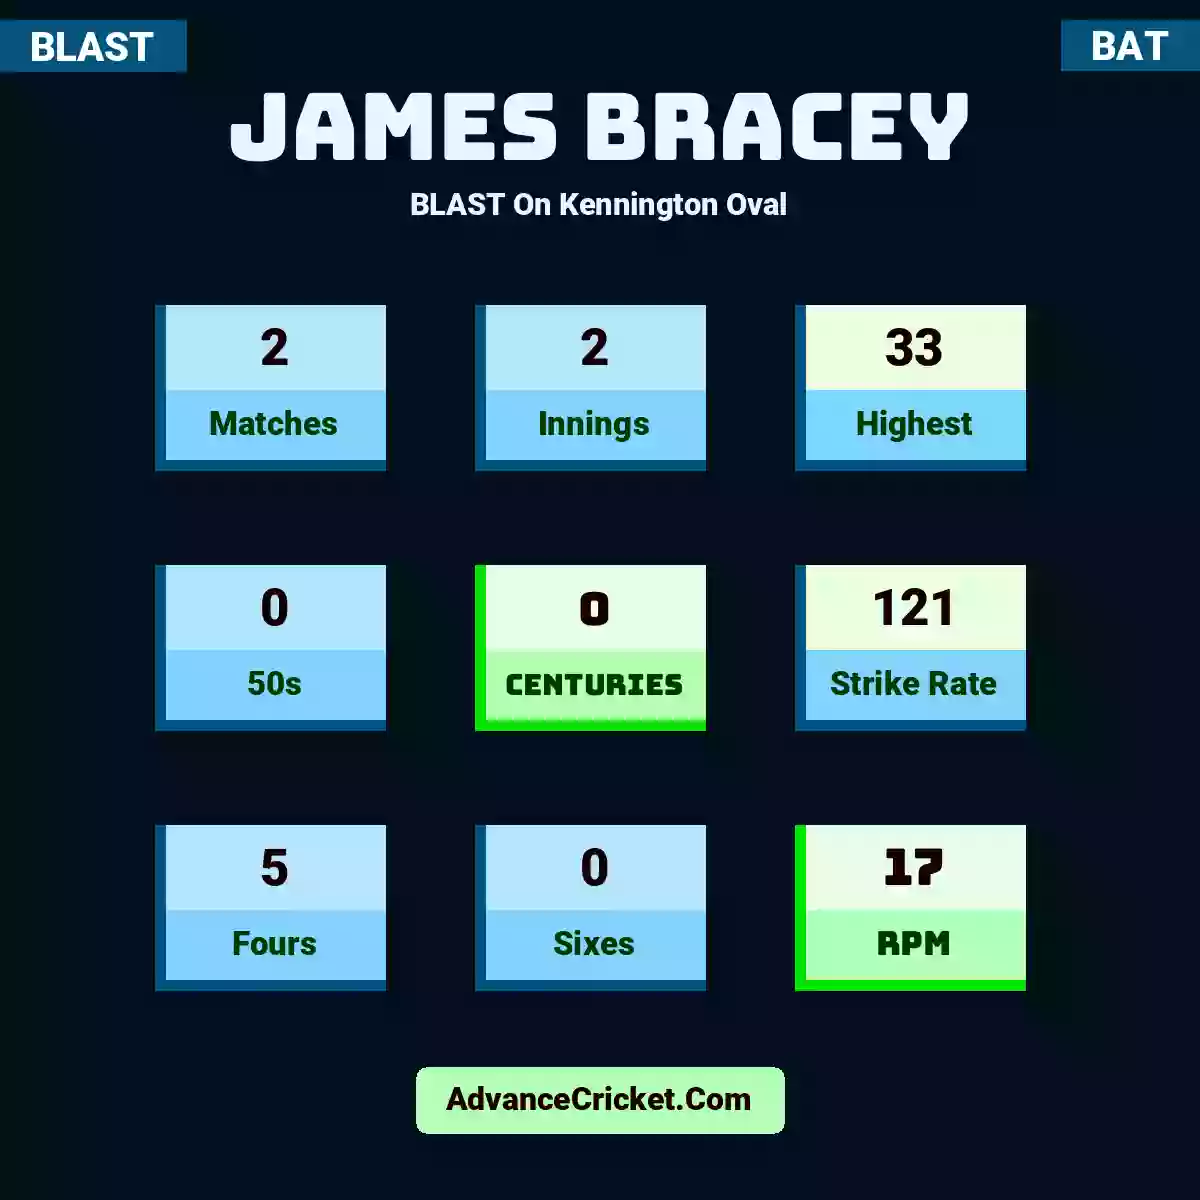 James Bracey BLAST  On Kennington Oval, James Bracey played 2 matches, scored 33 runs as highest, 0 half-centuries, and 0 centuries, with a strike rate of 121. J.Bracey hit 5 fours and 0 sixes, with an RPM of 17.